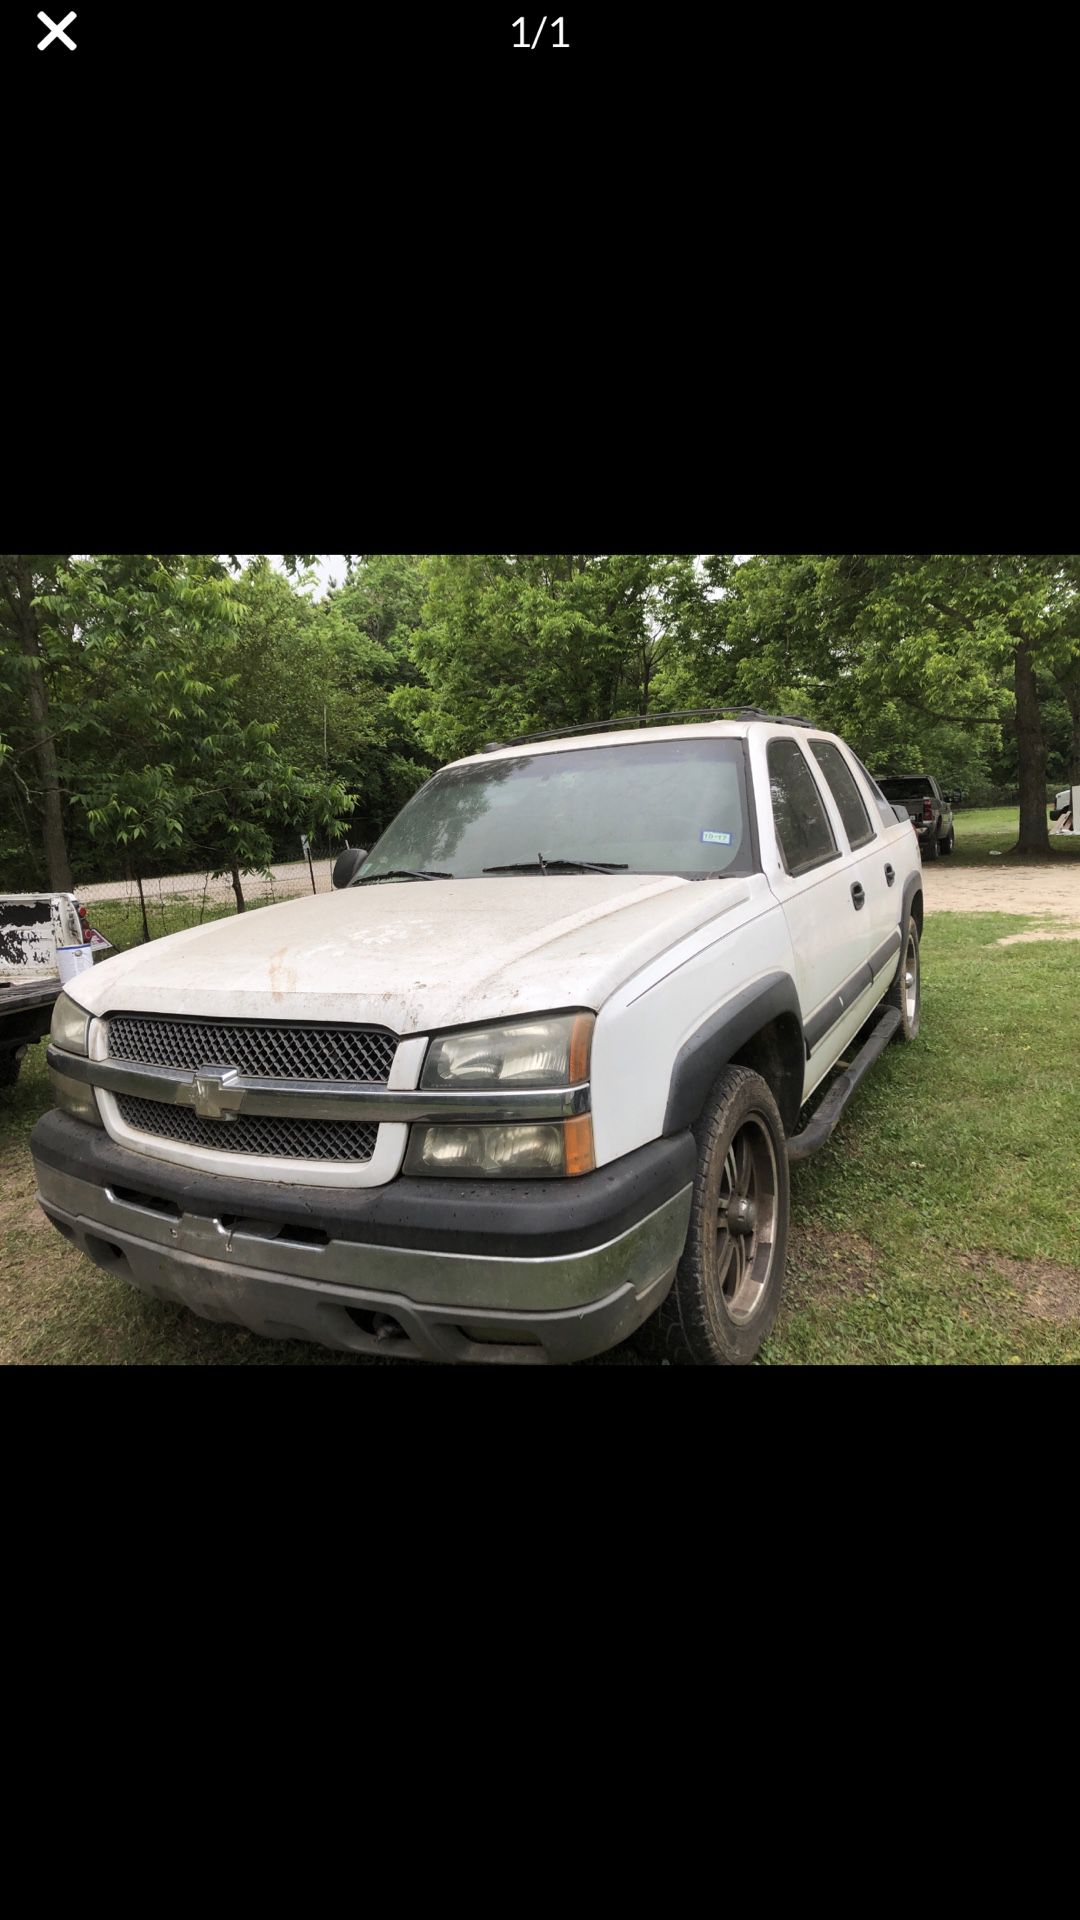 Avalanche parts truck for sale